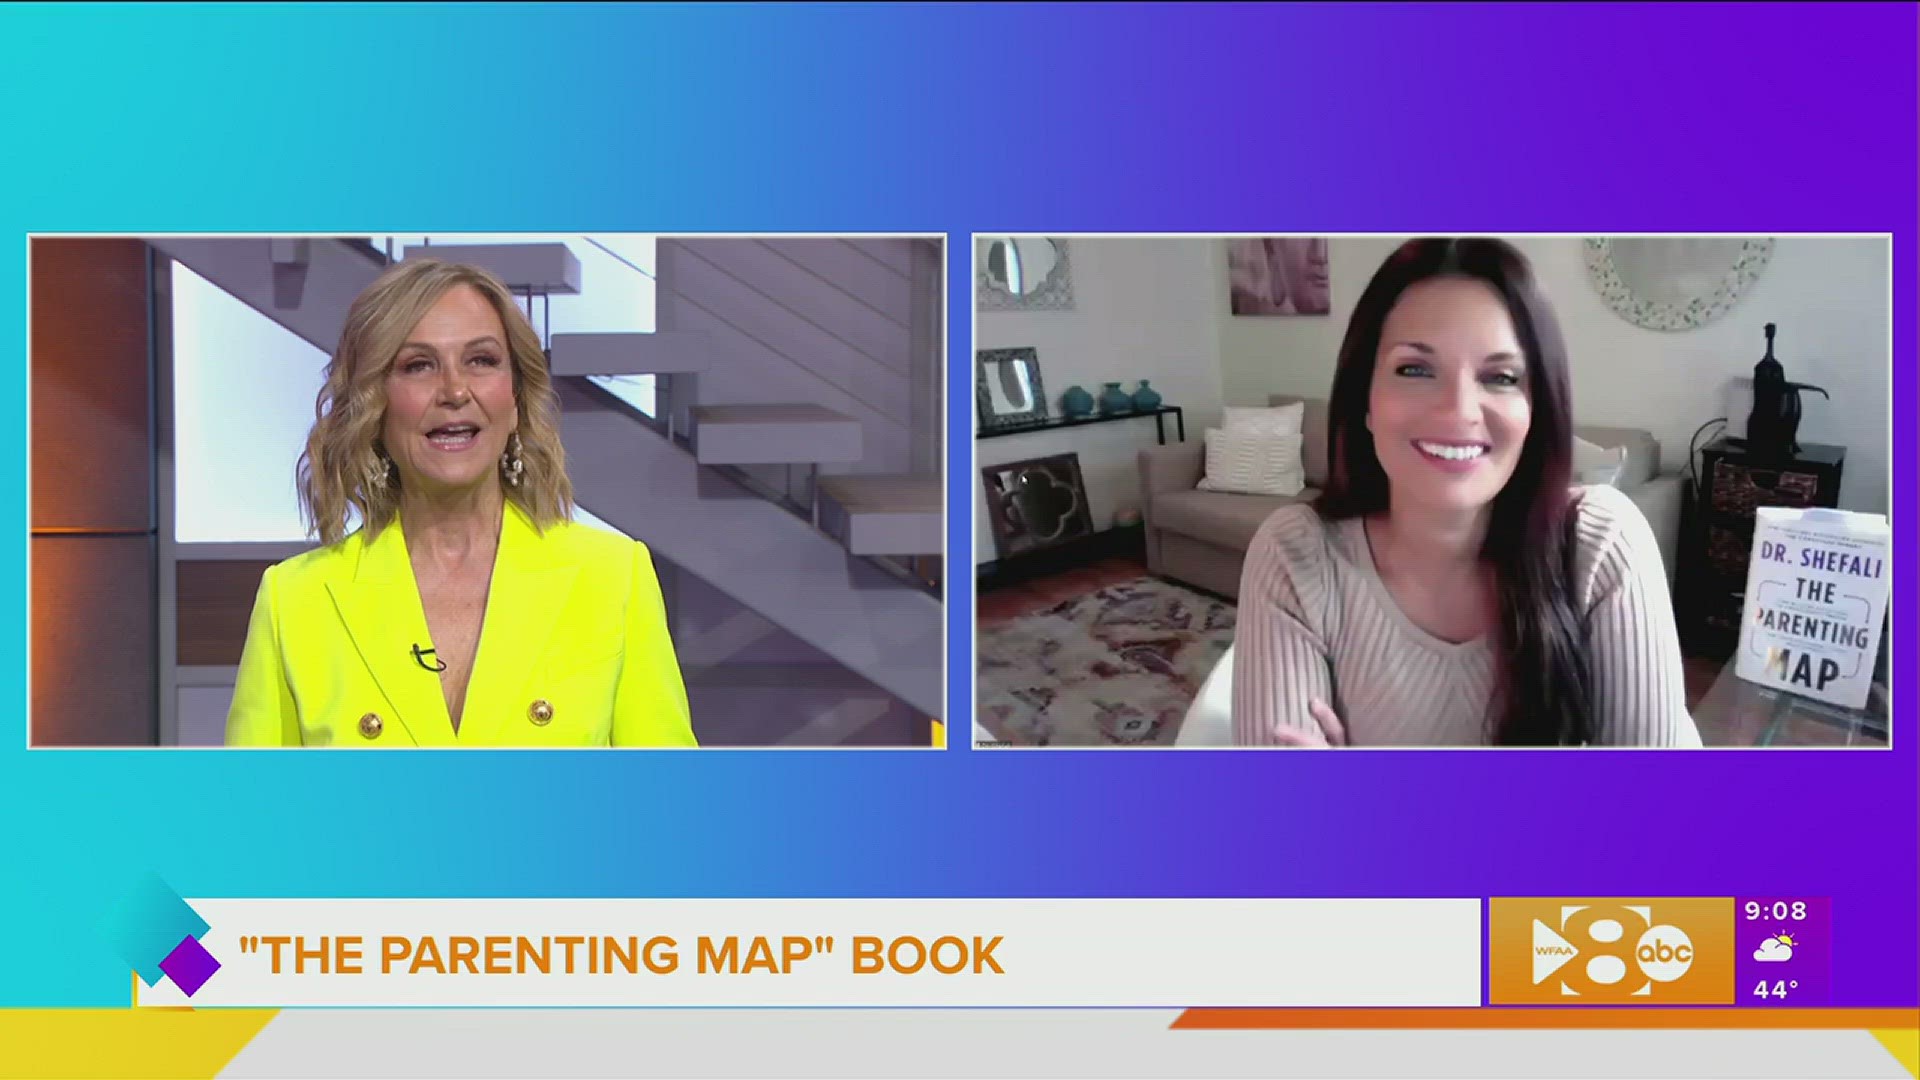 New York Times Bestselling author Dr. Shefali talks about her new book and the steps parents can take to bond with their children. Go to drshefali.com for more info.